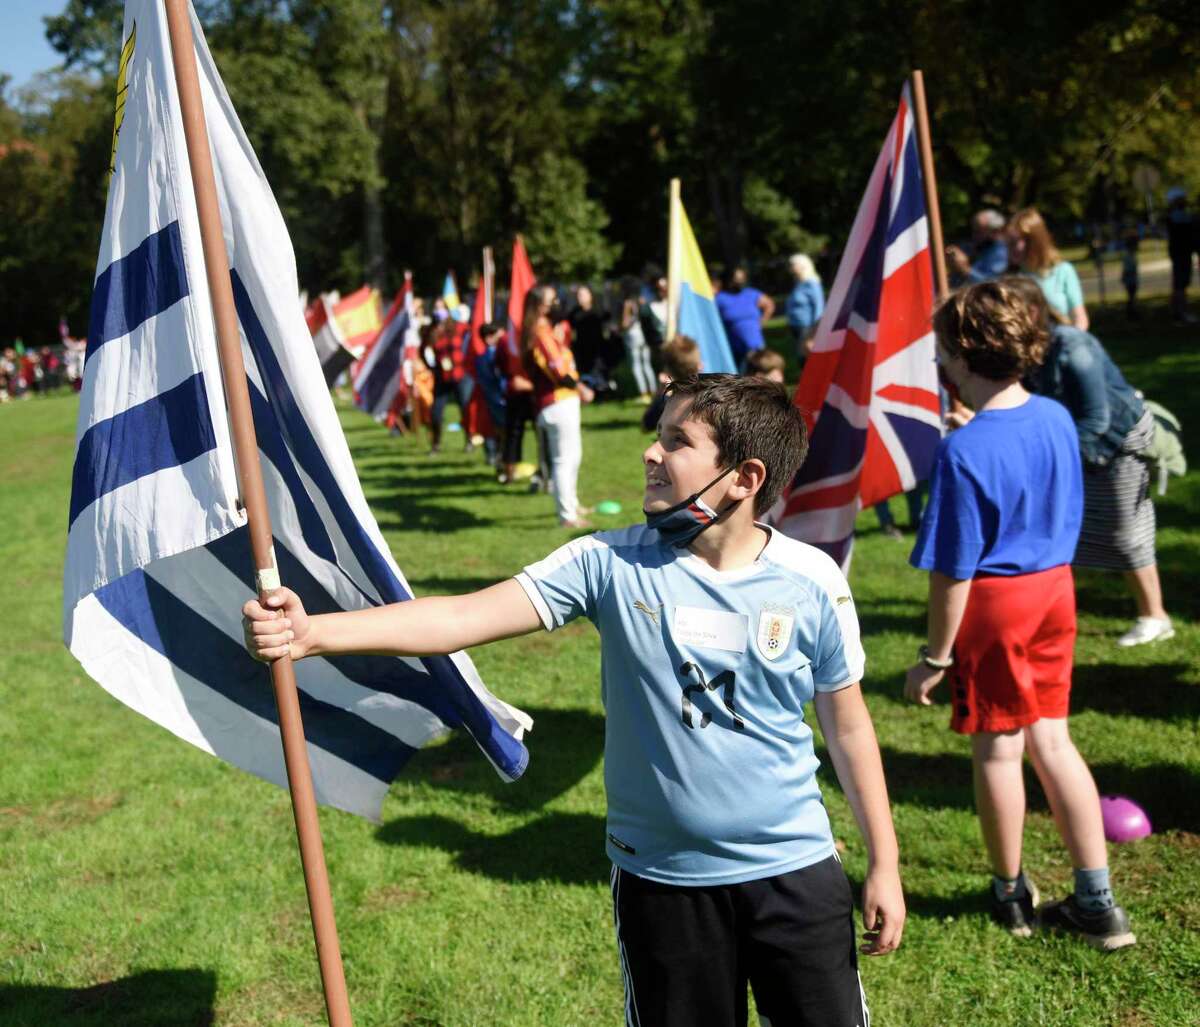 Fourth-grader Tiago Da Silva holds the Uruguay flag during the United Nations Day Celebration "Parade of Nations" at Julian Curtiss School in Greenwich, Conn. Thursday, Oct. 21, 2021. Students representing 60 countries and speaking 30 different languages marched in the parade, waving flags and wearing clothing to represent their country's heritage.